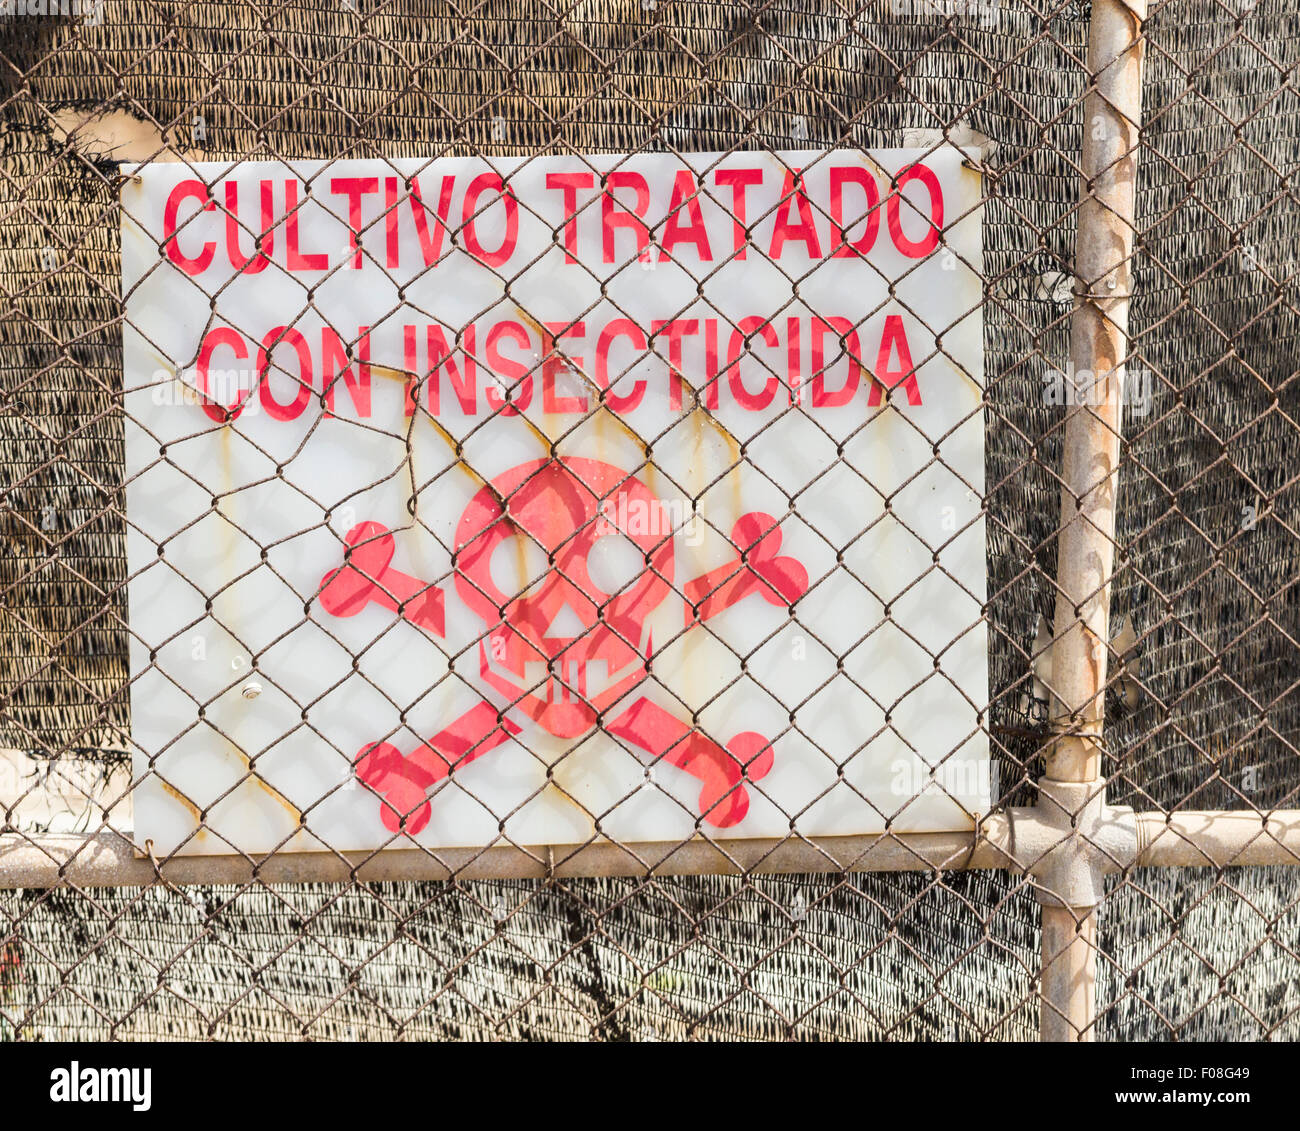 Sign in Spanish on farm gate in Spain saying crop treated with insecticide ( cultivo tratado con insecticida ). Stock Photo